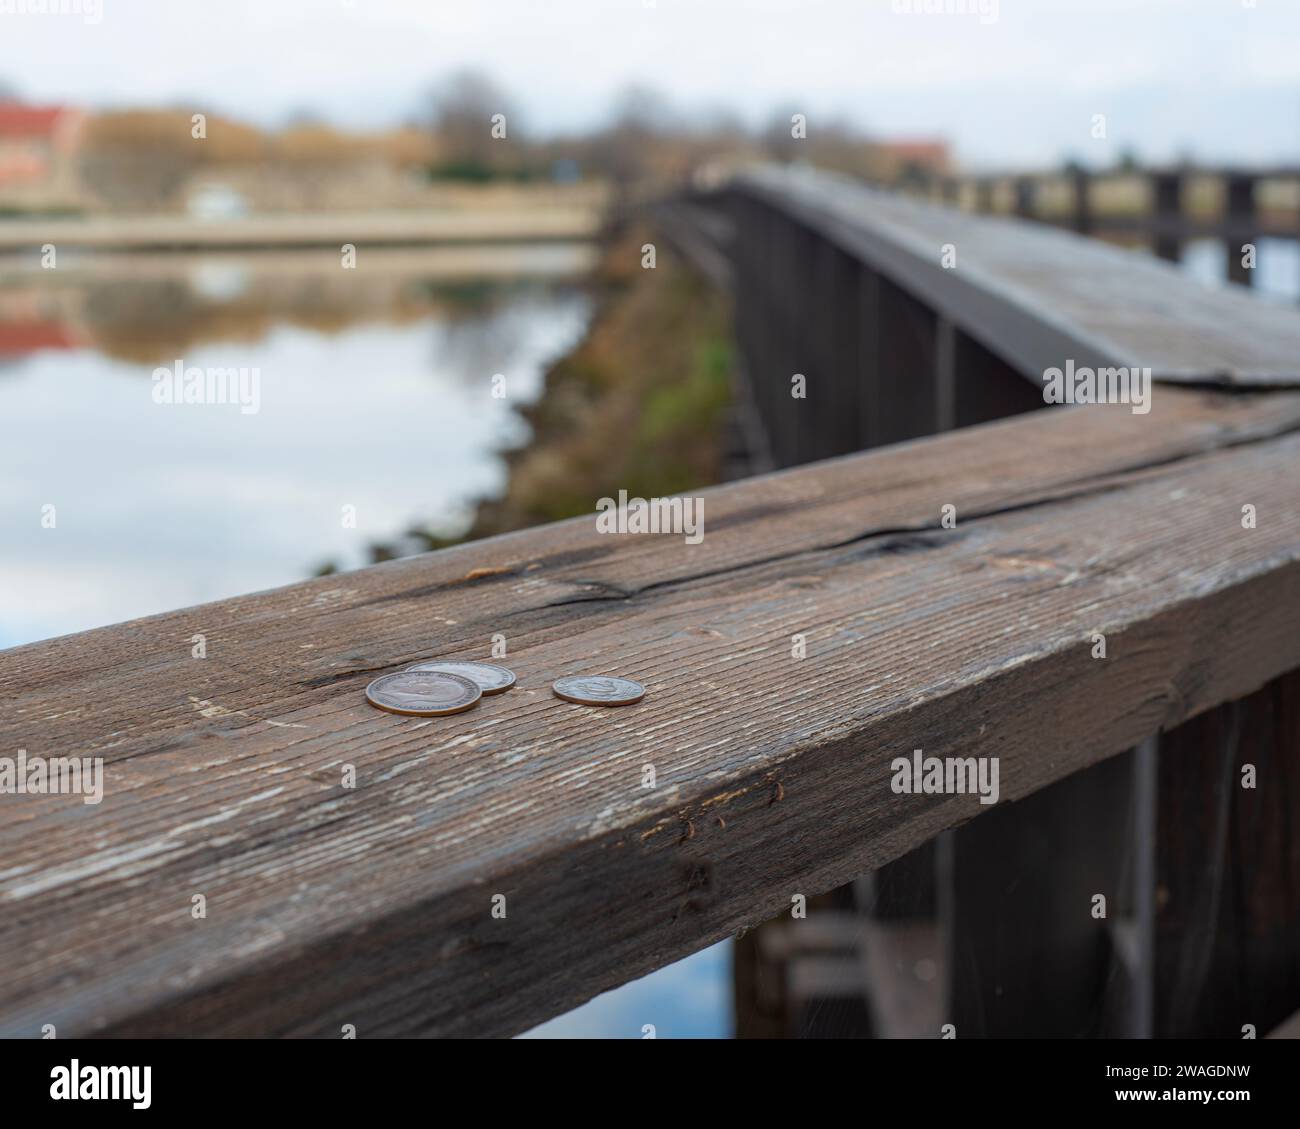 An aged wooden railing by a river is adorned with coins protruding from the top, creating a rustic, aged look Stock Photo